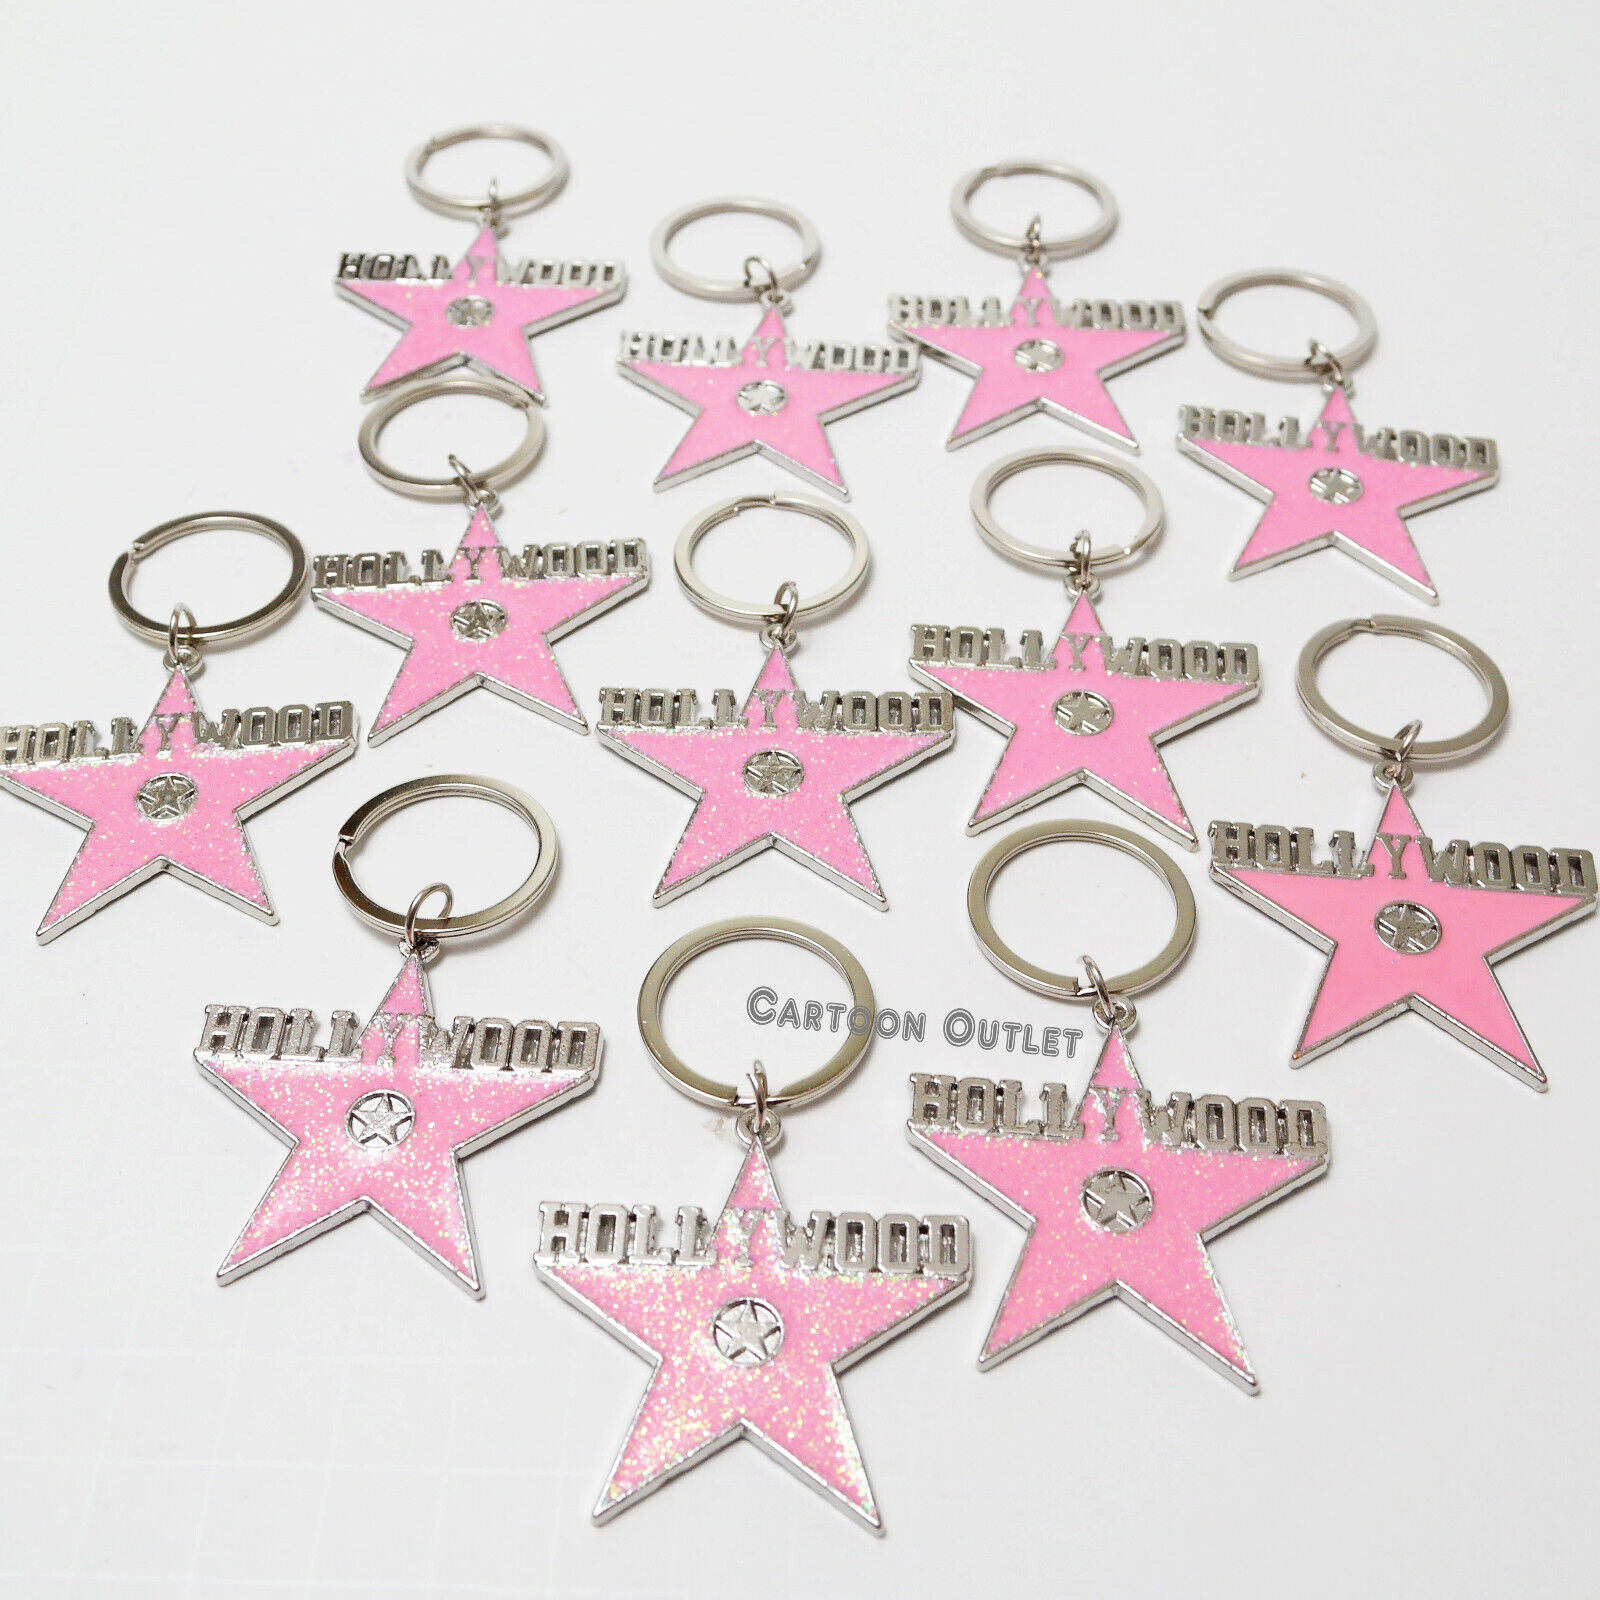 12 Hollywood Star Souvenir Keychain Pink Star Party Favors Metal New Key chain